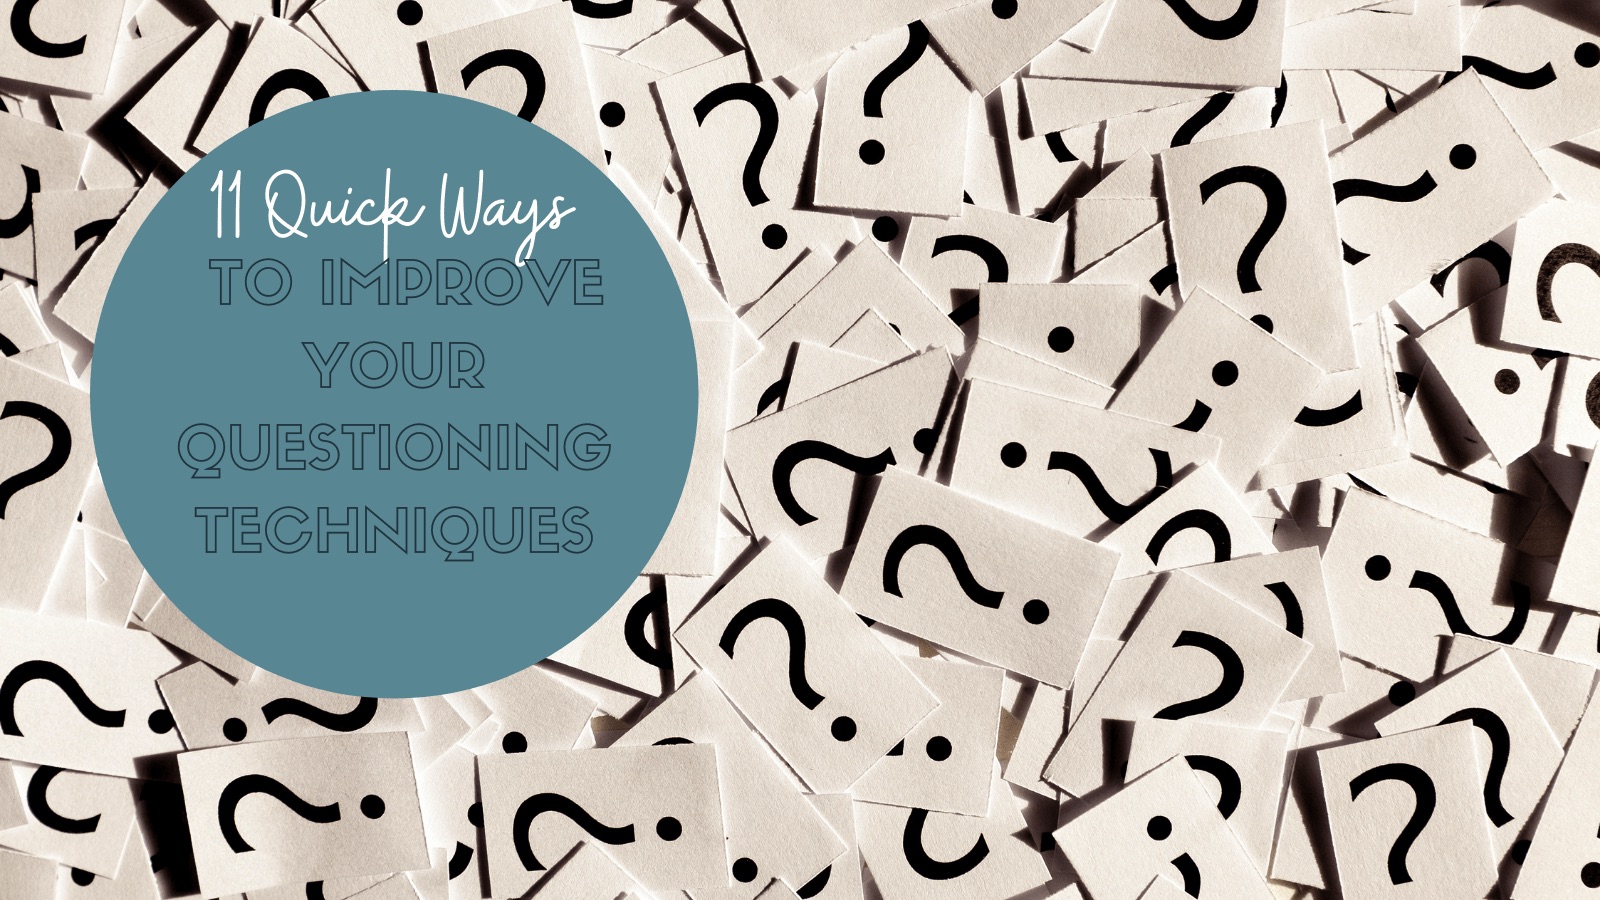 11 quick ways to improve your questioning techniques